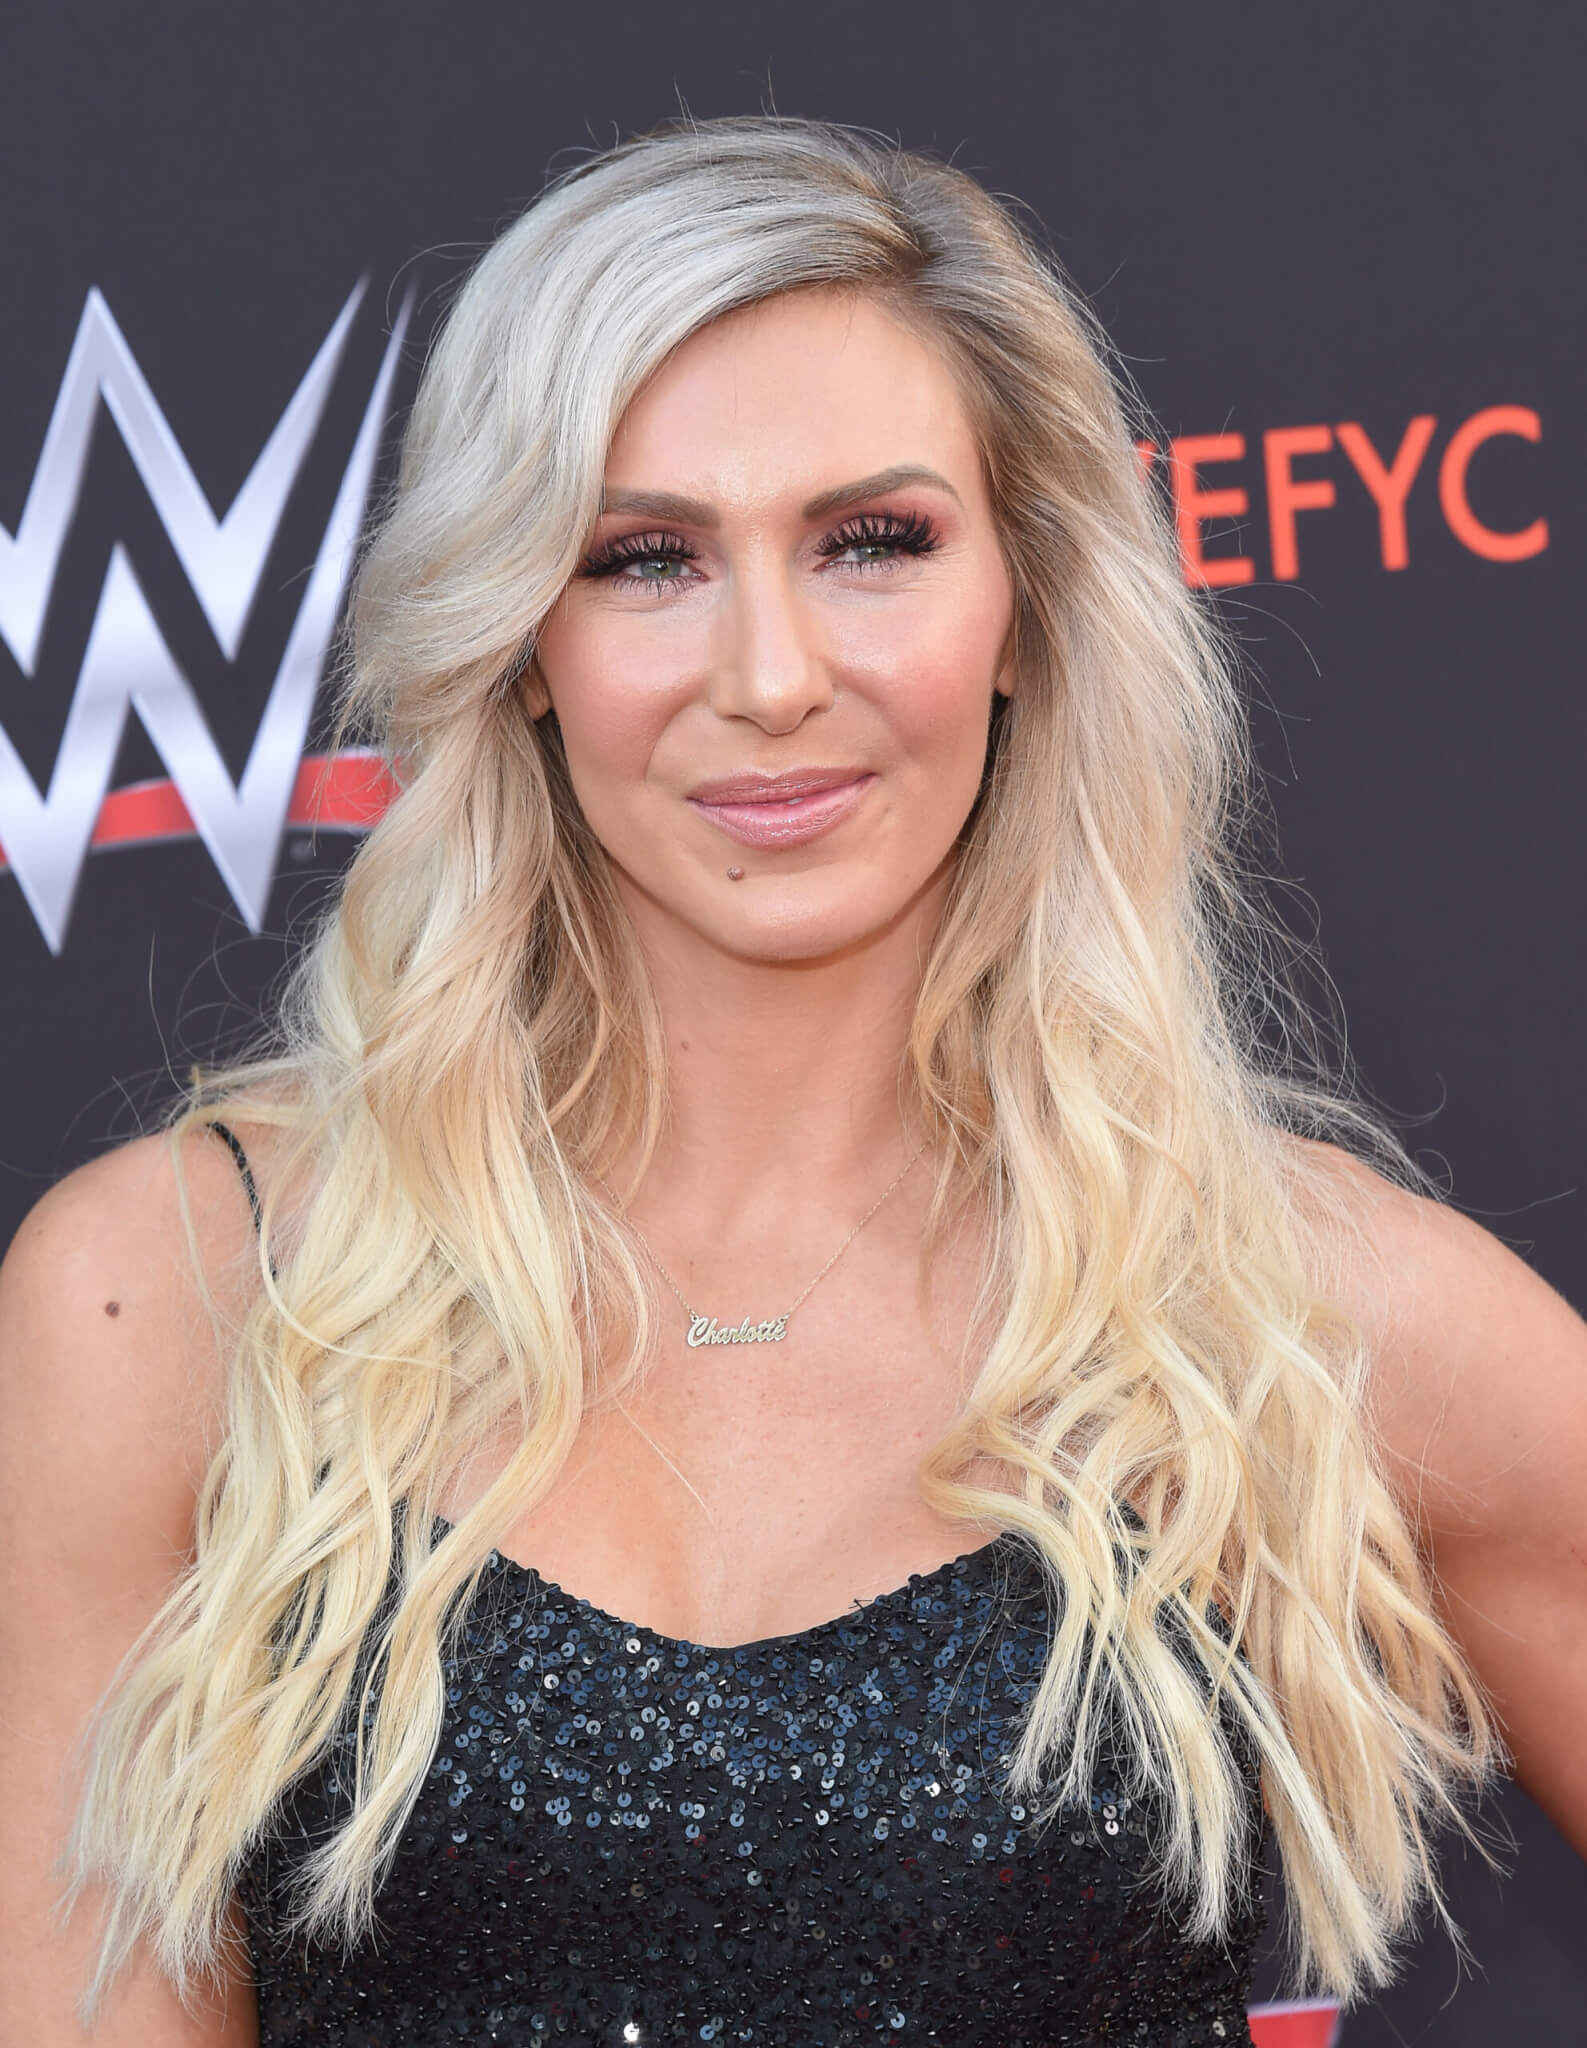 Charlotte Flair arrives to the 'WWE' FYC Event in 2018 in Hollywood, CA